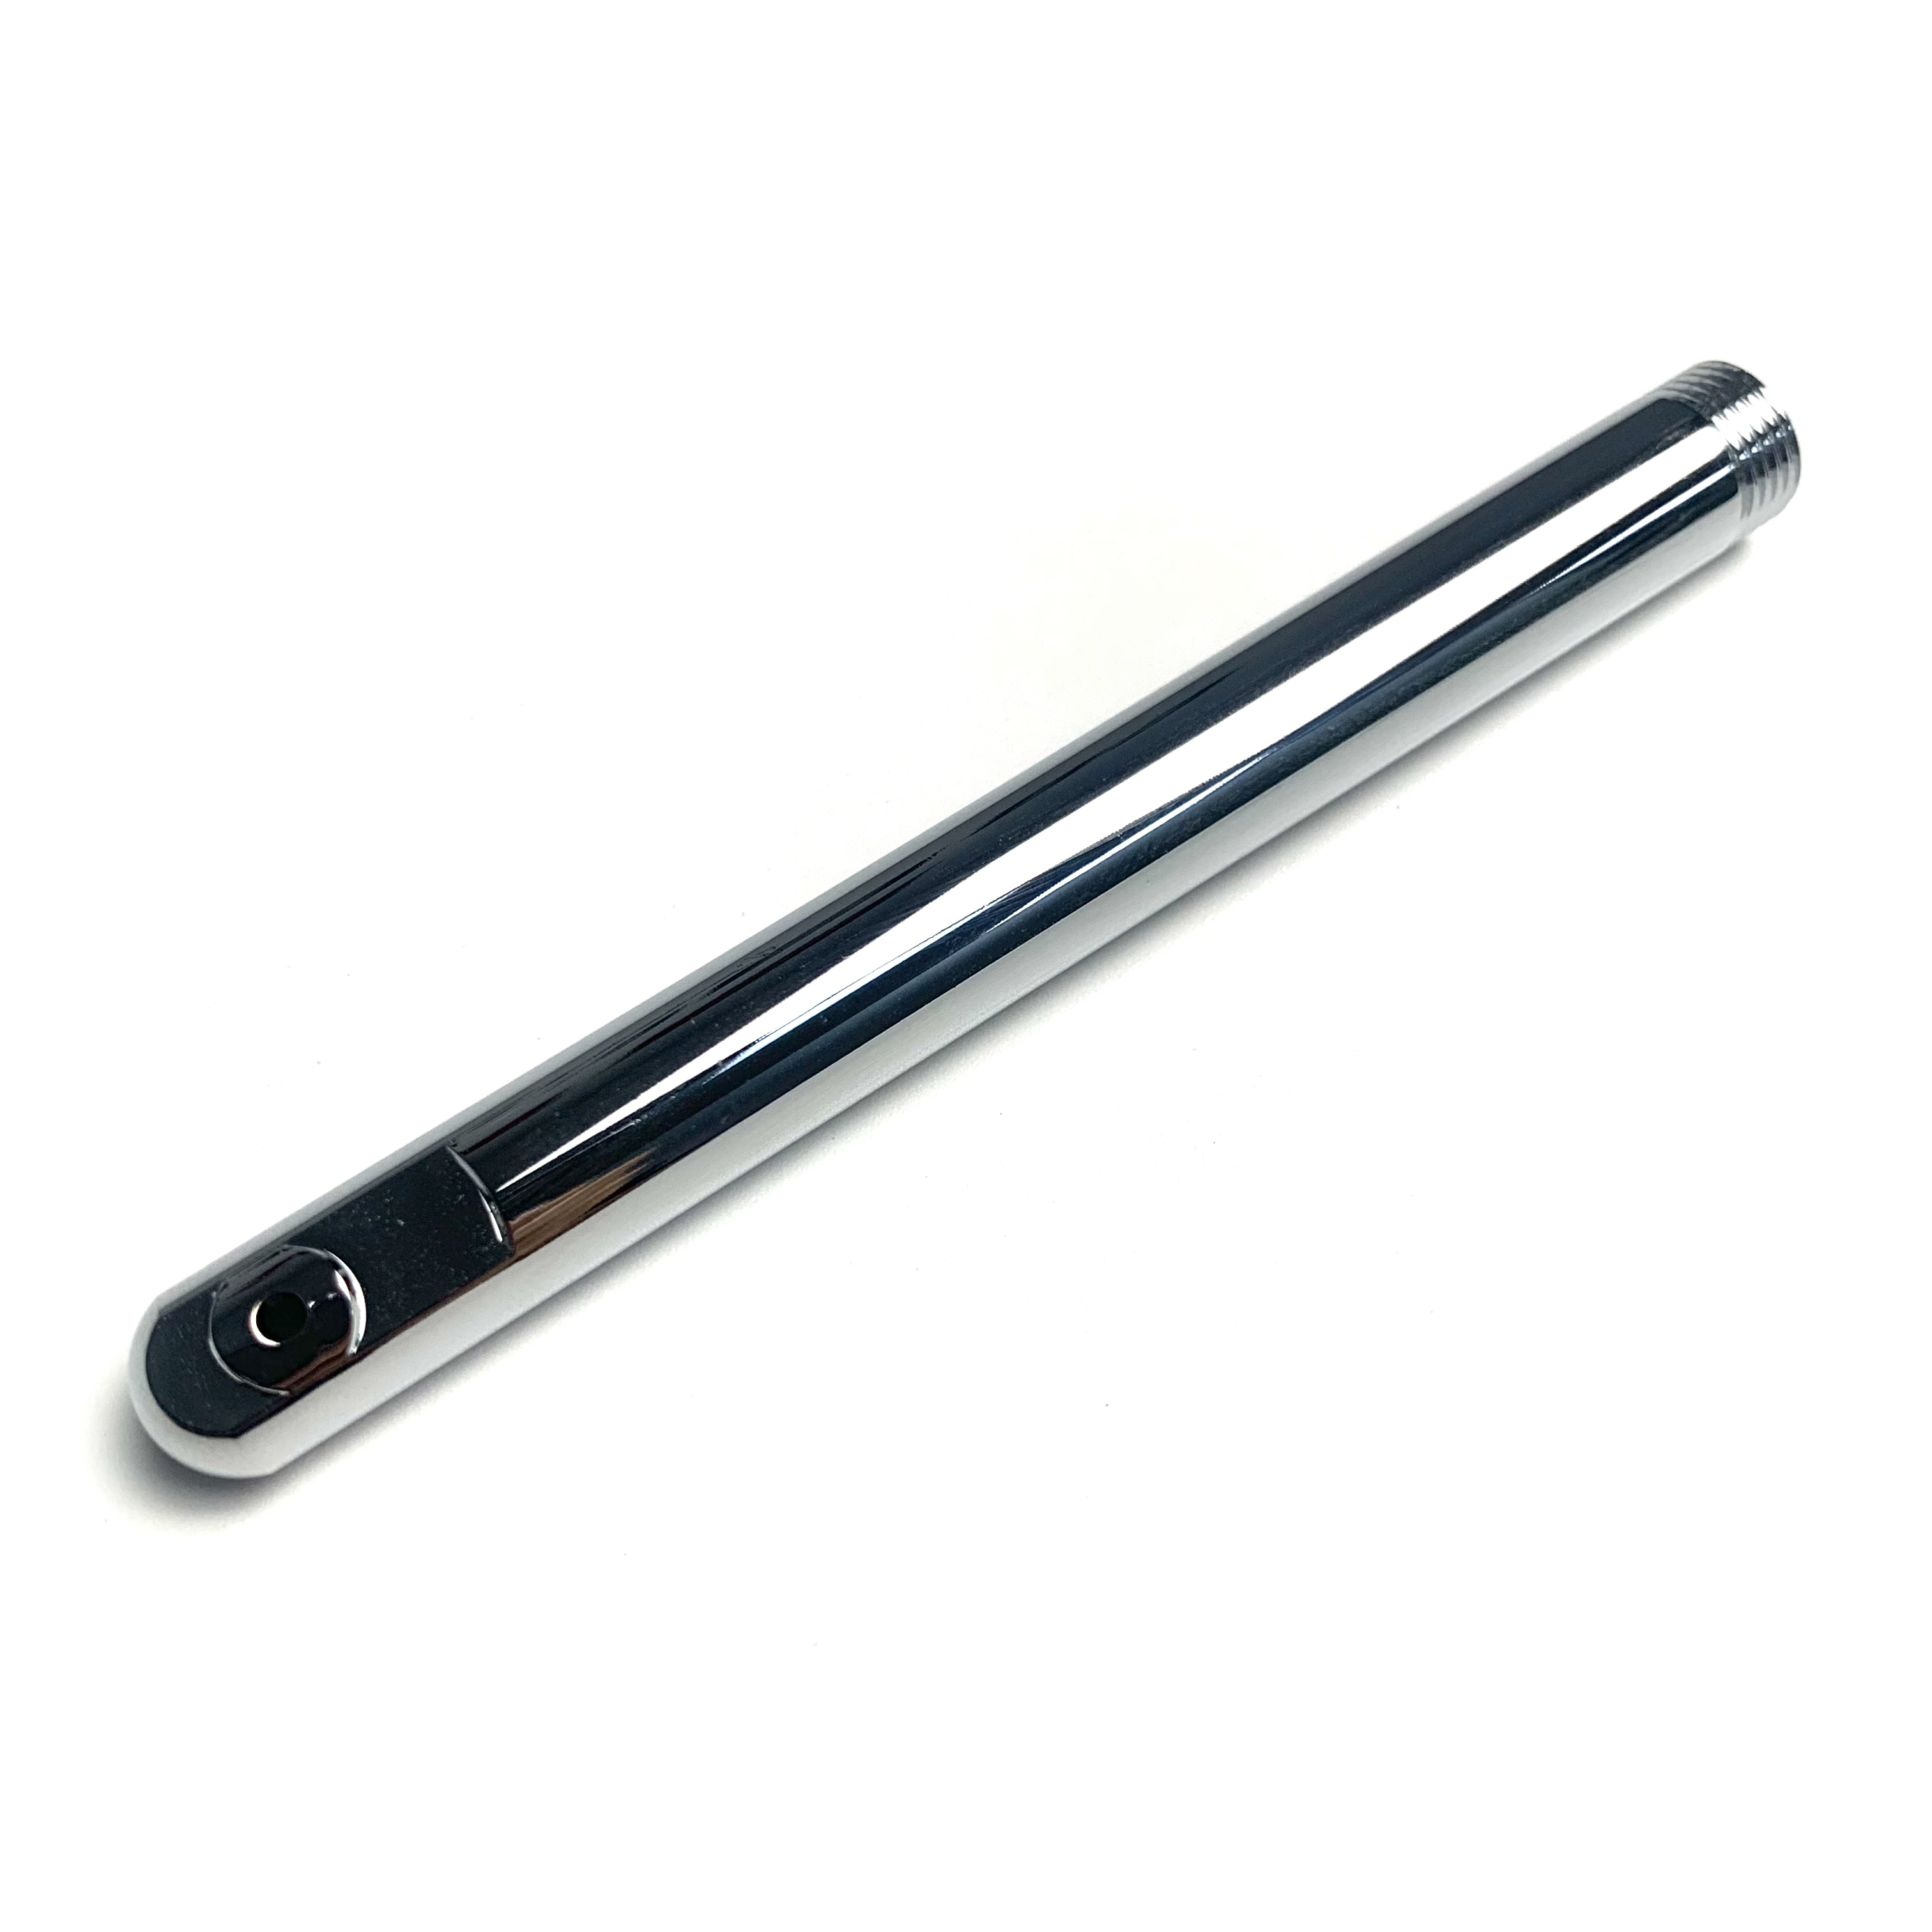 stick used for tap